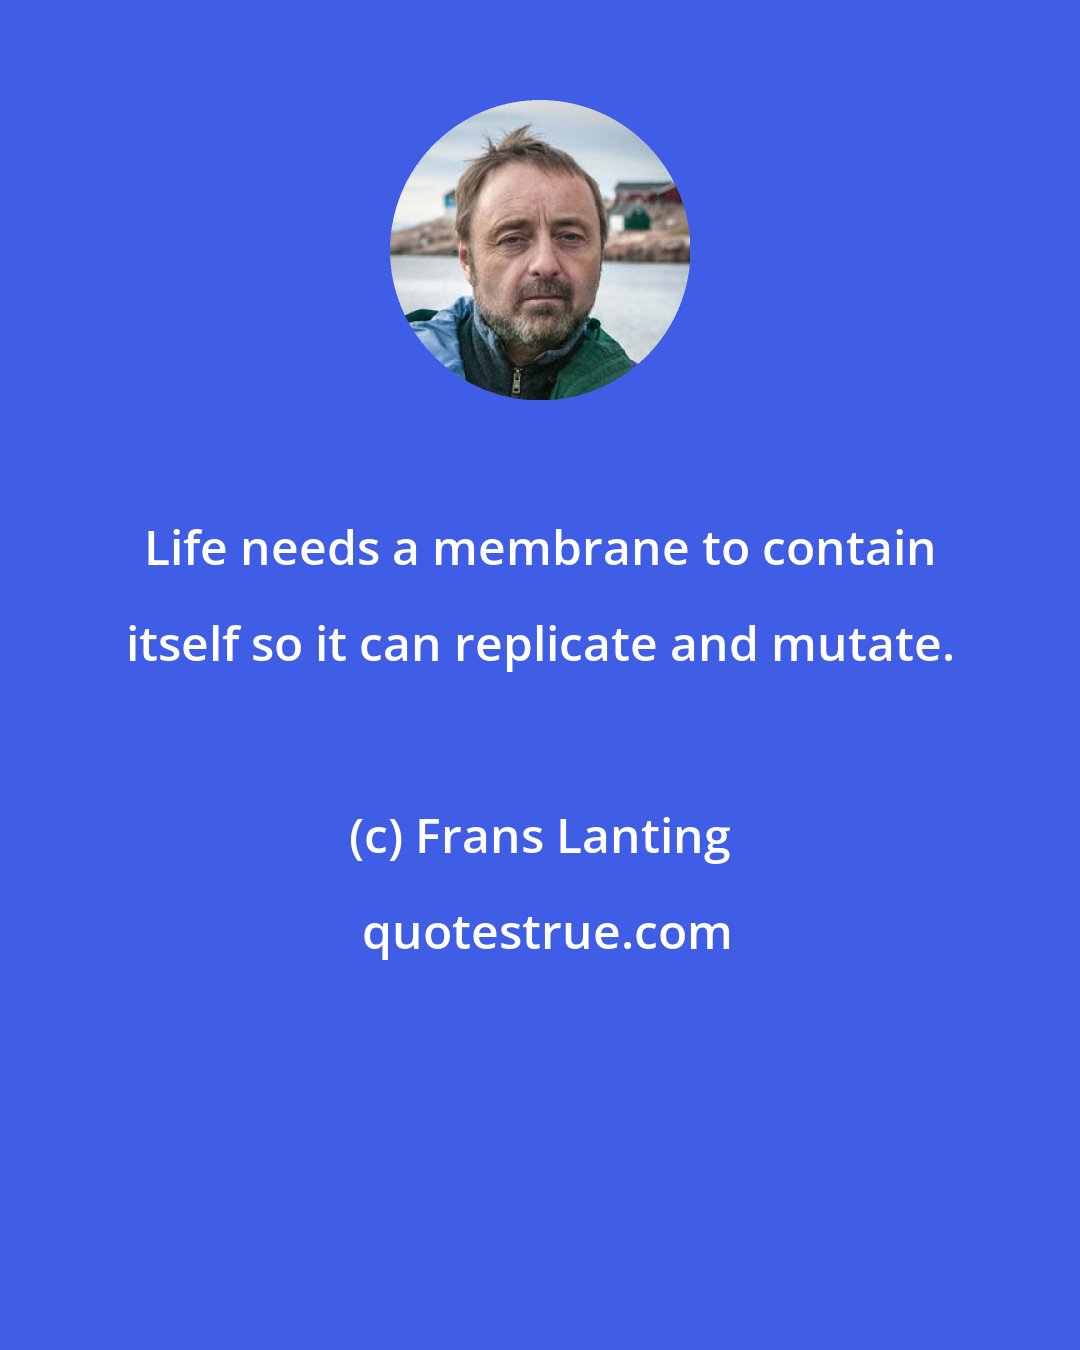 Frans Lanting: Life needs a membrane to contain itself so it can replicate and mutate.